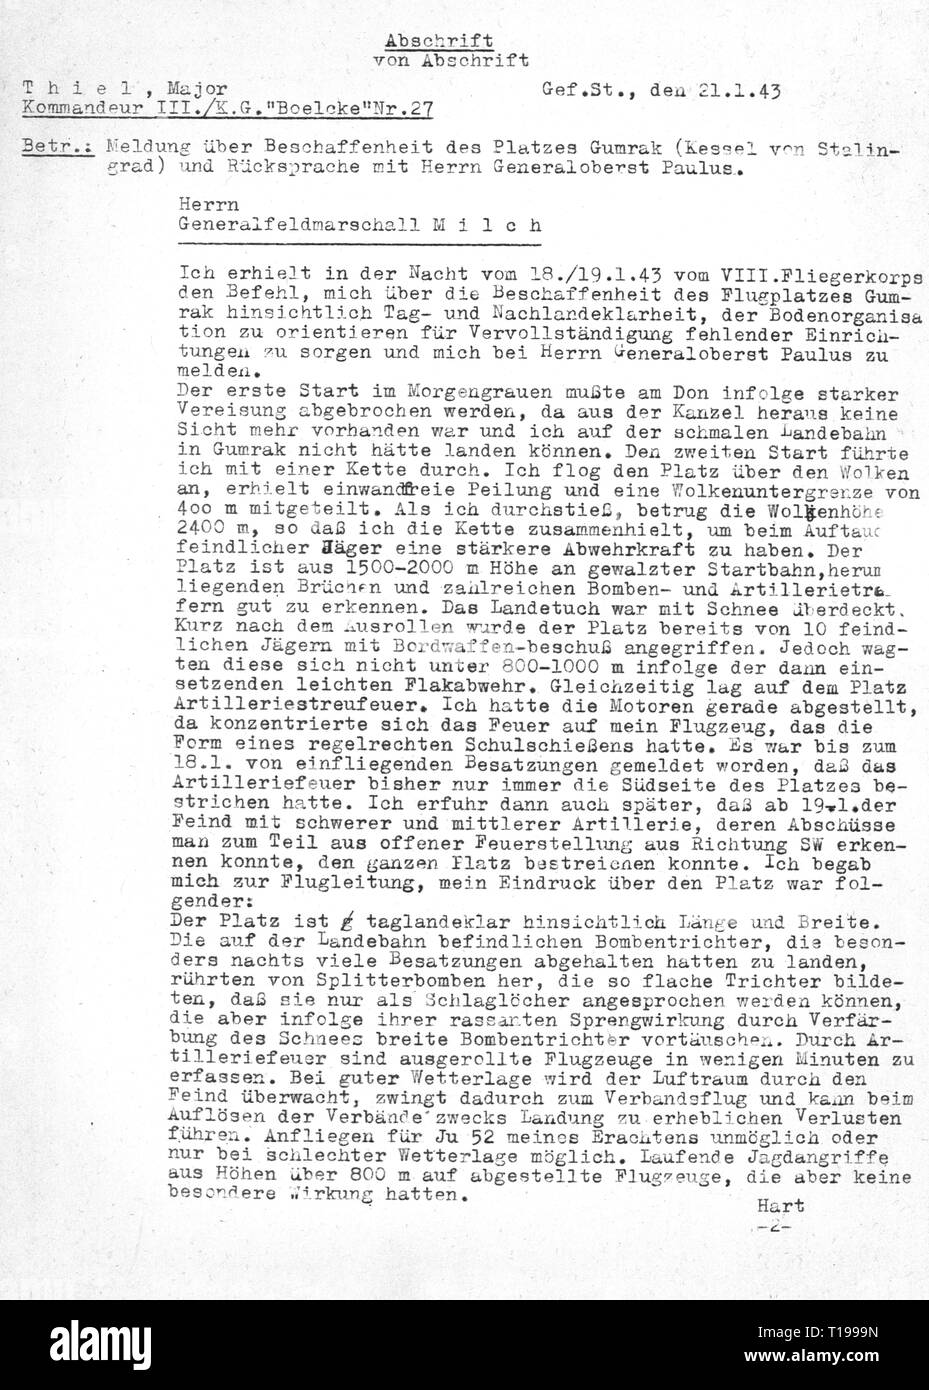 Second World War / WWII, Russia, Battle of Stalingrad, 23.8.1942 - 2.2.1943, report of major Erich Thiel, Commanding Officer of III Group, Fighter Wing 27 'Boelcke', about the condition of the airfield Gumrak and the consultation with Field Marshal General Friedrich Paulus, general commanding 6th Army, to Field Marshal Erhard Milch, Inspector General of the Luftwaffe (German Air Force), command post Stalino, 21.1.1943, copy, page 1, dispatch, despatch, dispatches, despatches, encirclement, German Luftwaffe (German Air Force), Wehrmacht, armed for, Additional-Rights-Clearance-Info-Not-Available Stock Photo